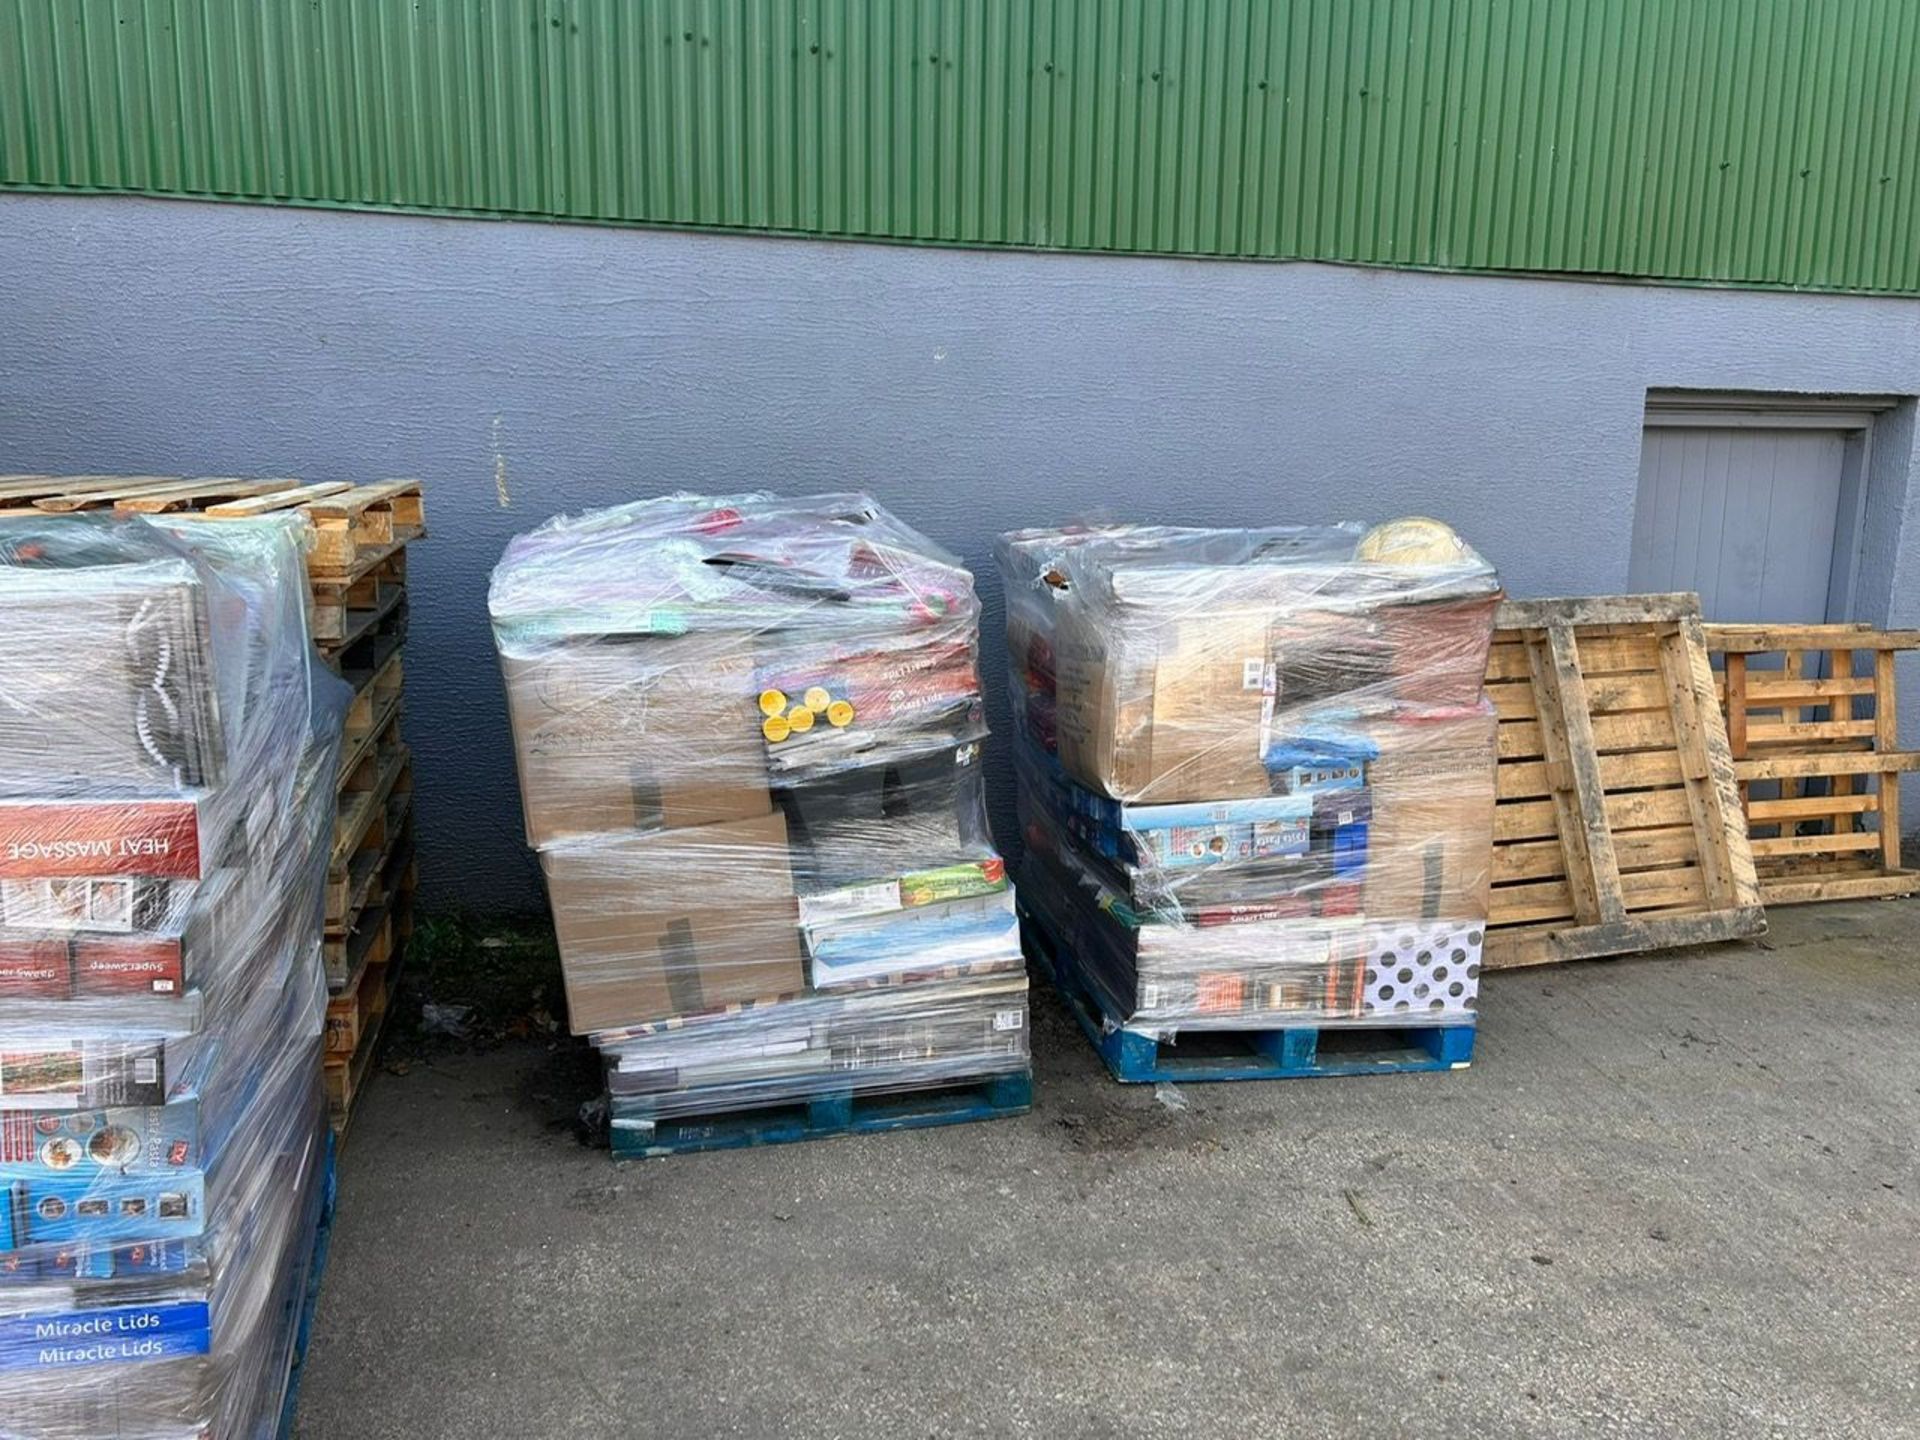 Large Pallet of Unchecked Supermarket Stock. Huge variety of items which may include: tools, toys, - Image 17 of 18